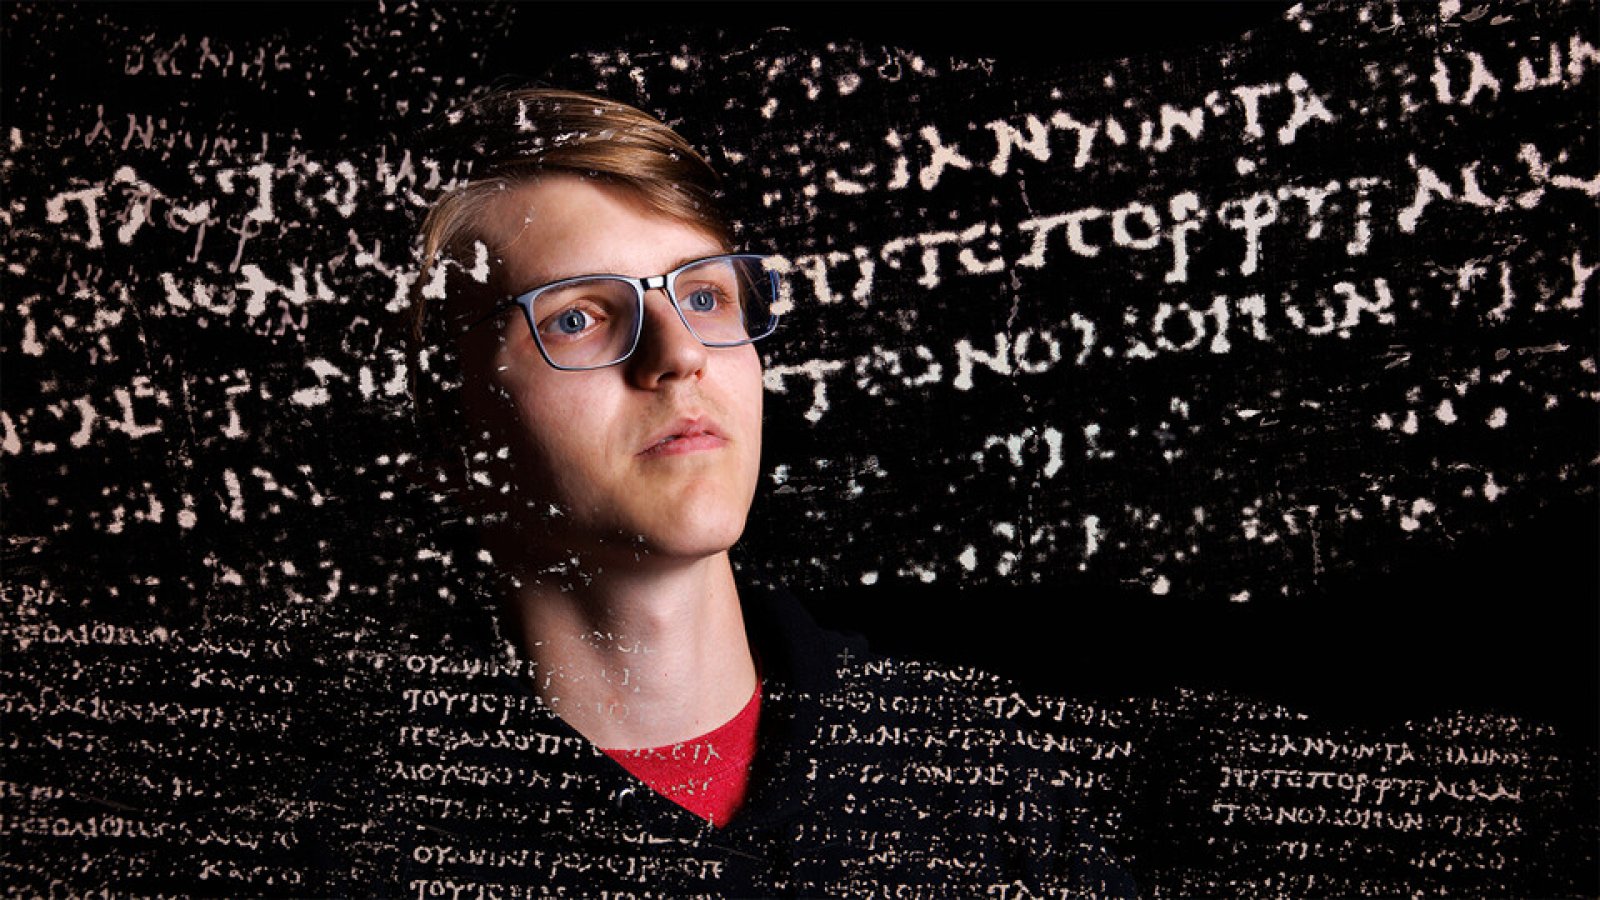 Luke Farritor, a senior majoring in computer science in the Raikes School, is shown with superimposed Greek text from a nearly 2,000-year-old scroll that his work helping to decipher. (Craig Chandler / University Communication and Marketing)